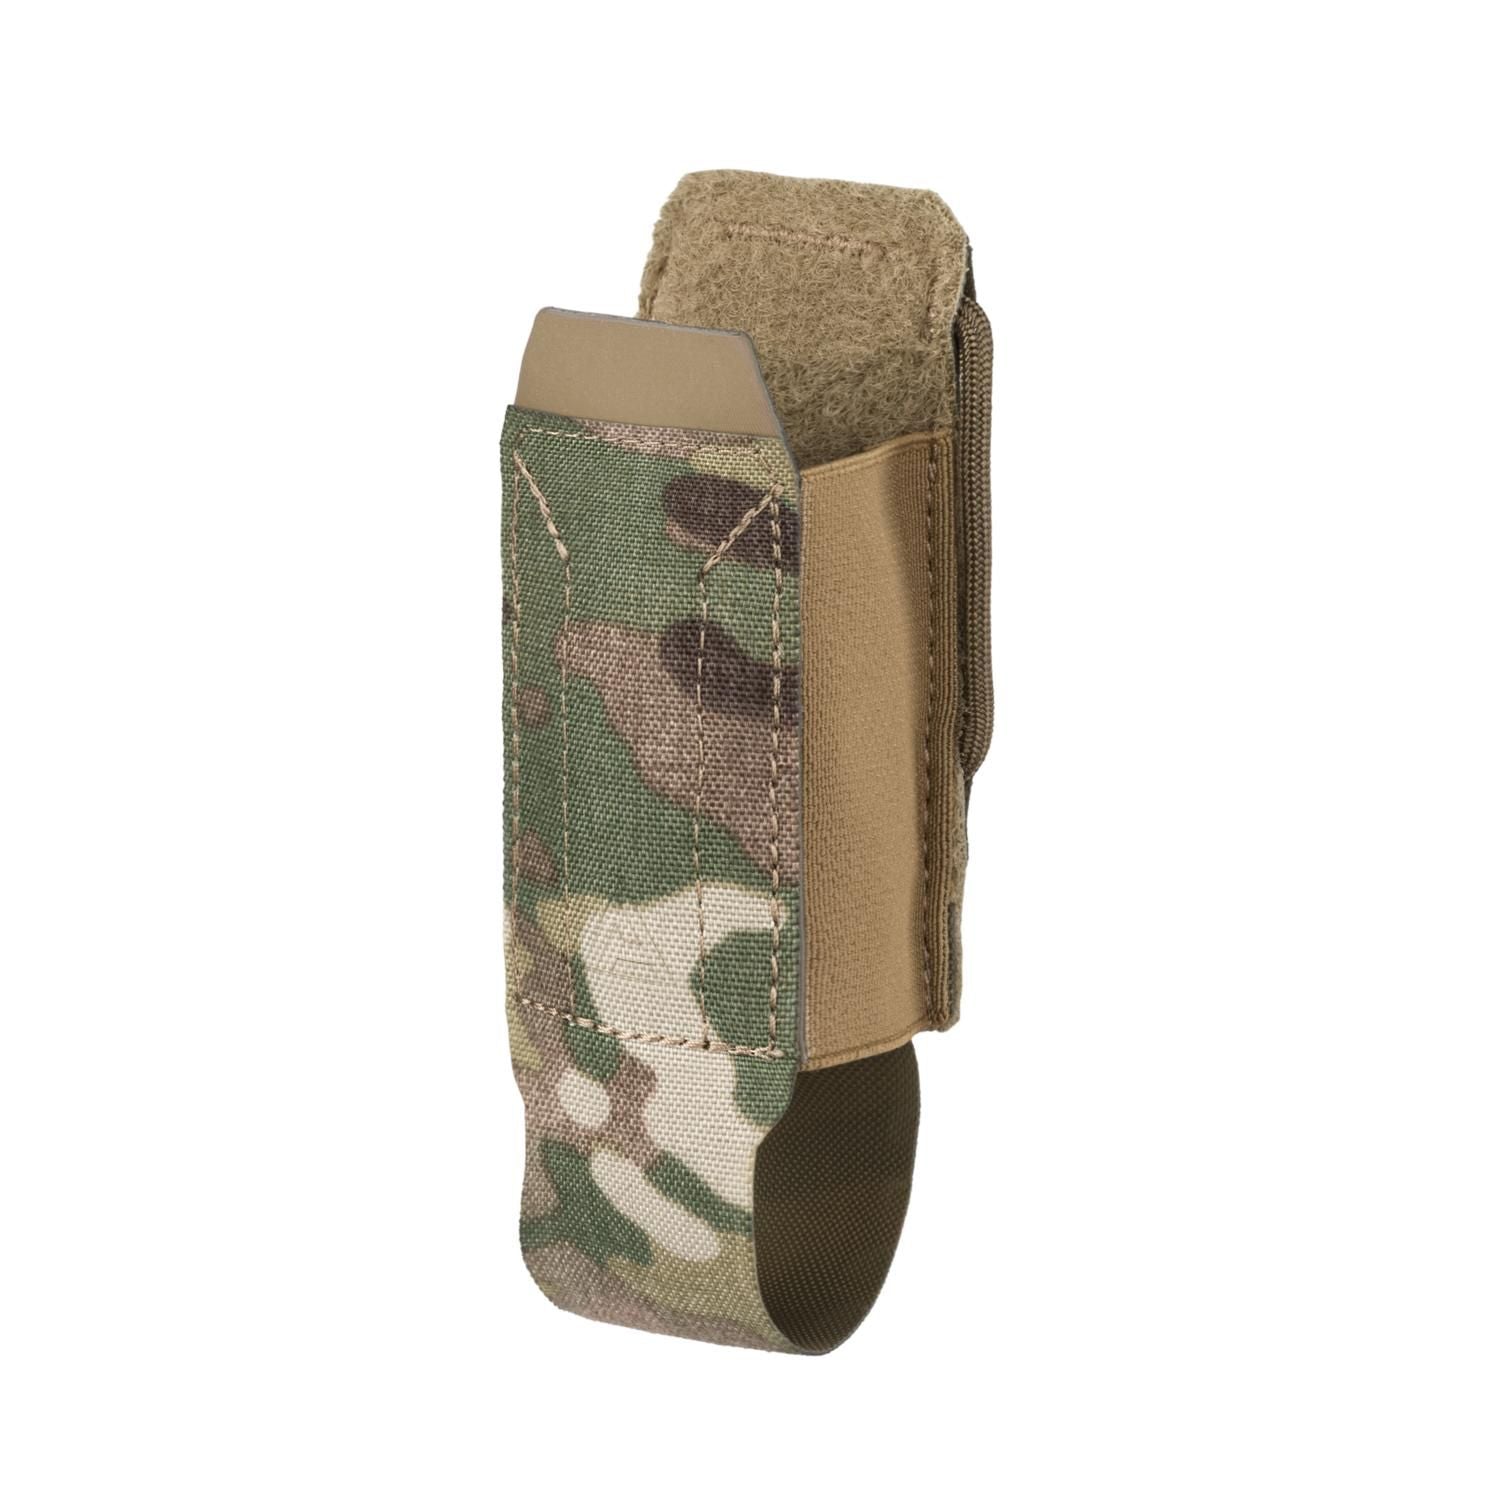 FLASHBANG pouch open - Crye Multicam